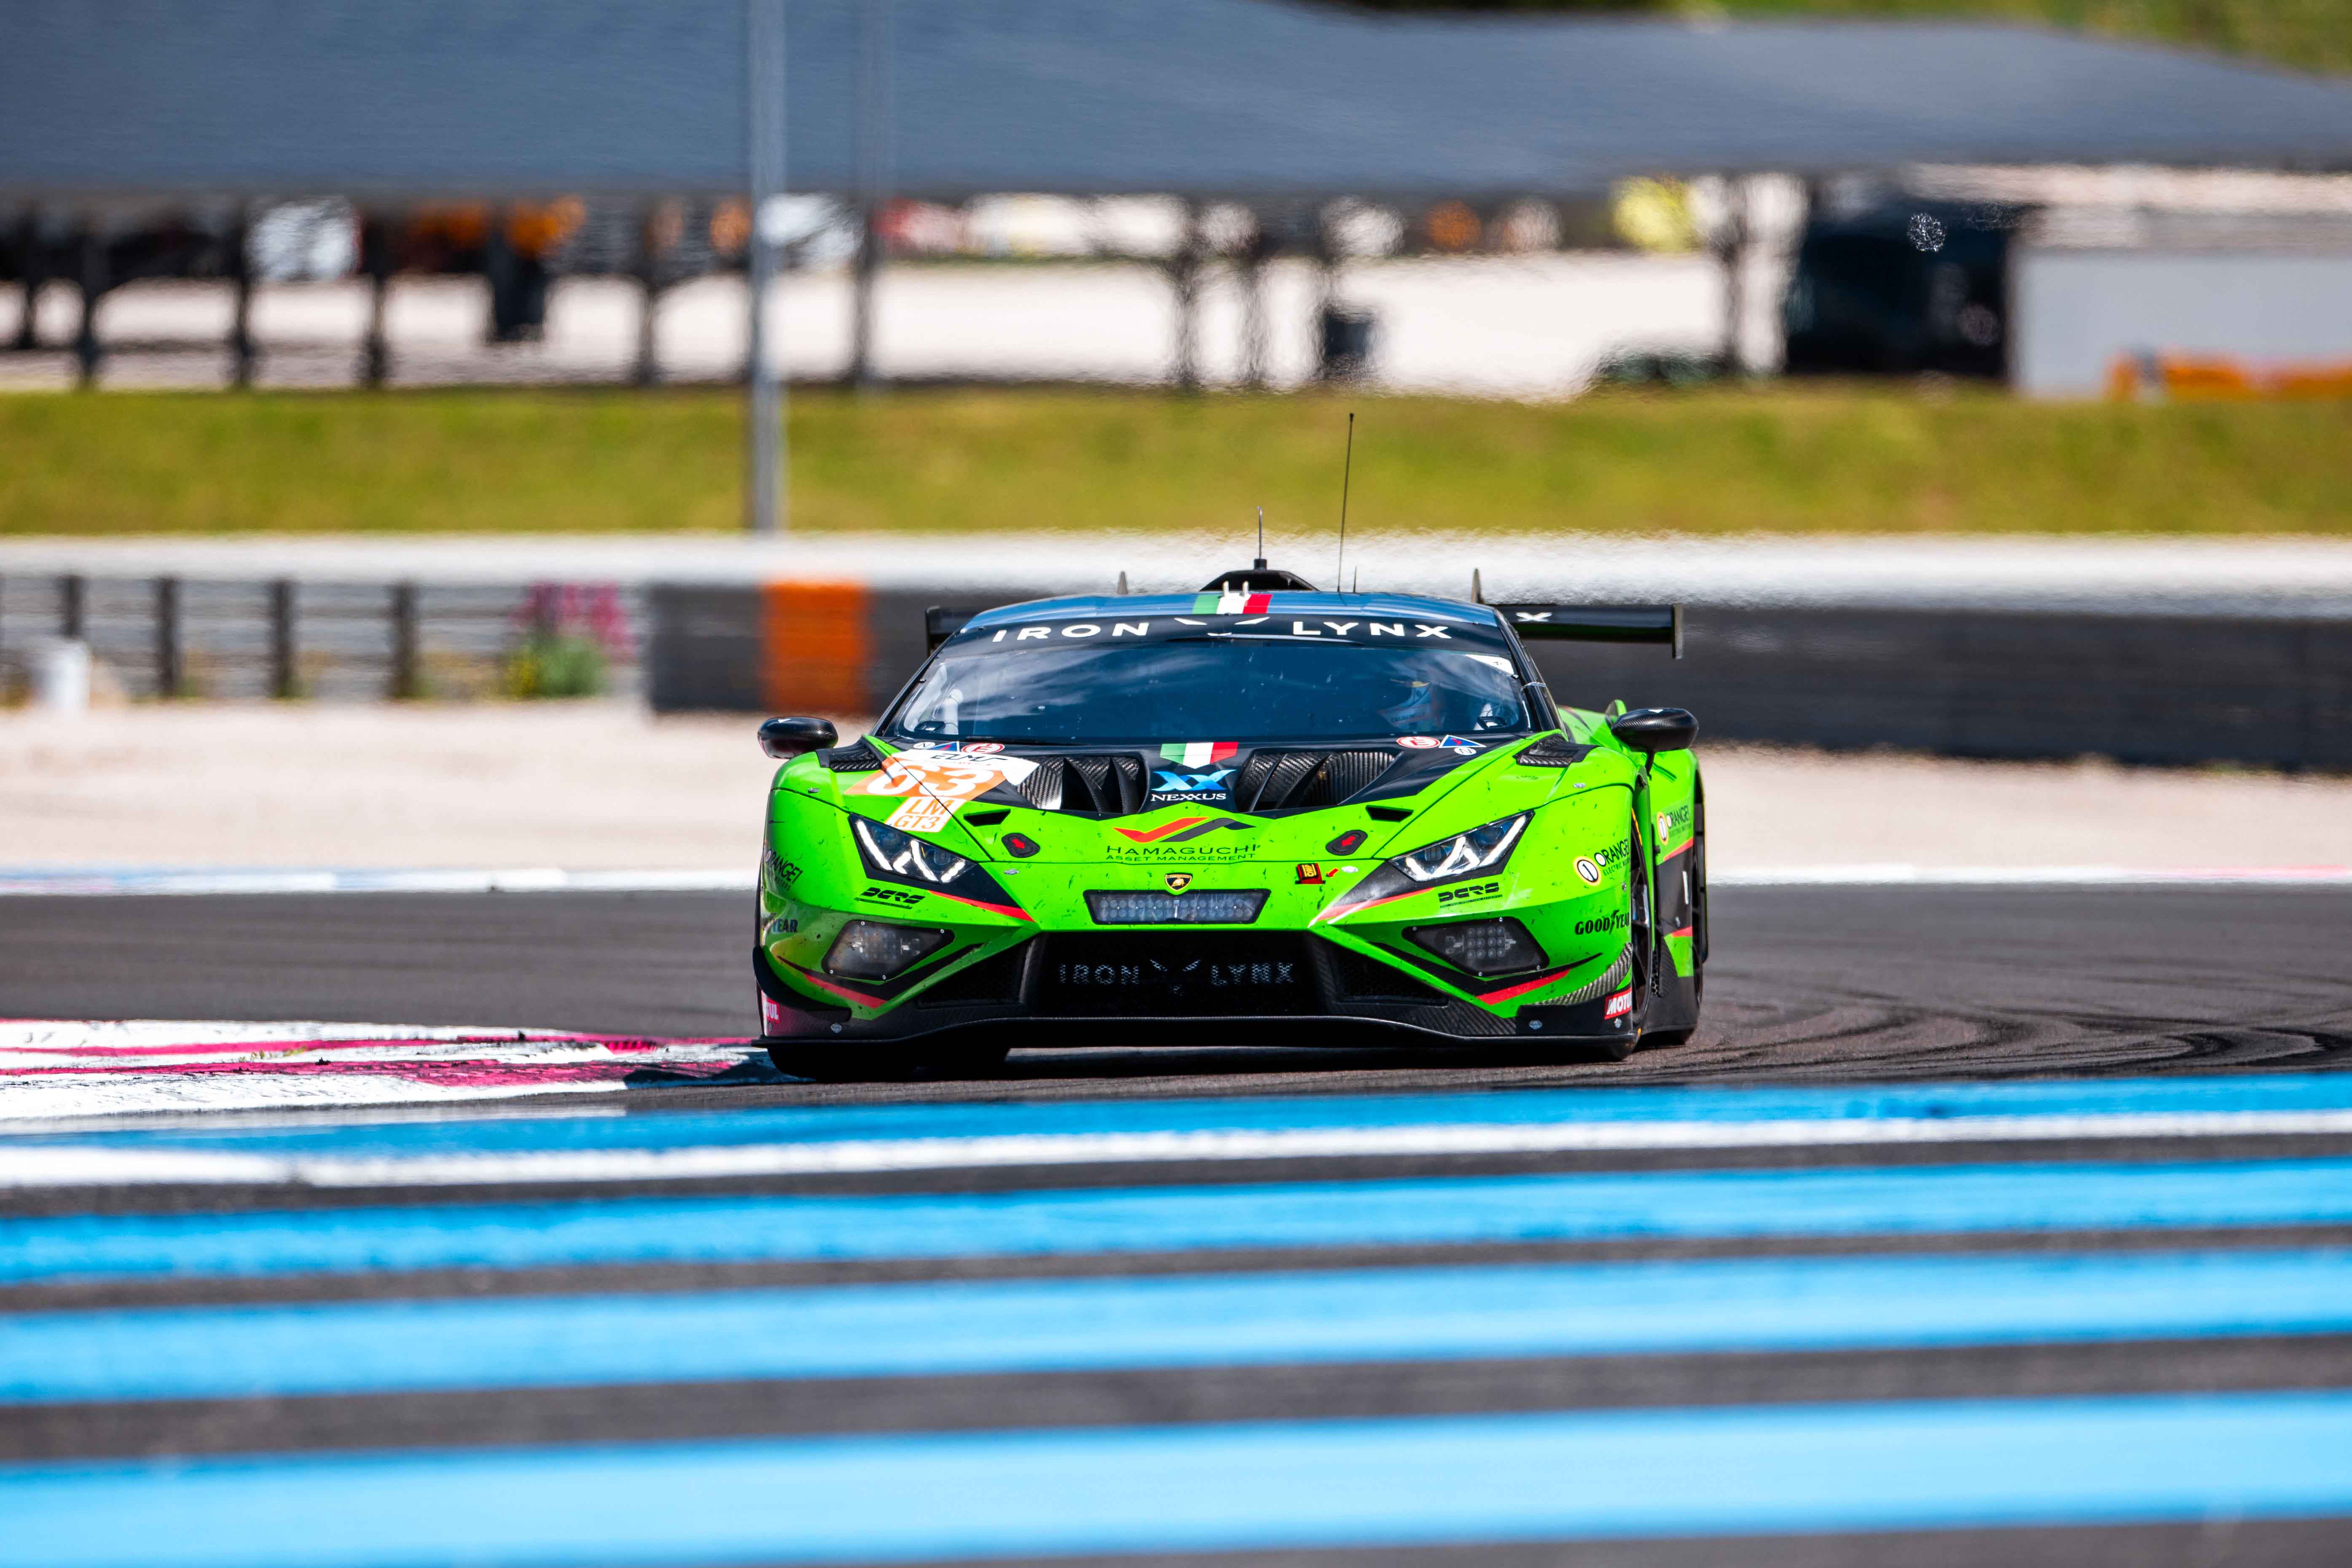 The Iron Lynx LMGT3 car in ELMS at Paul Ricard